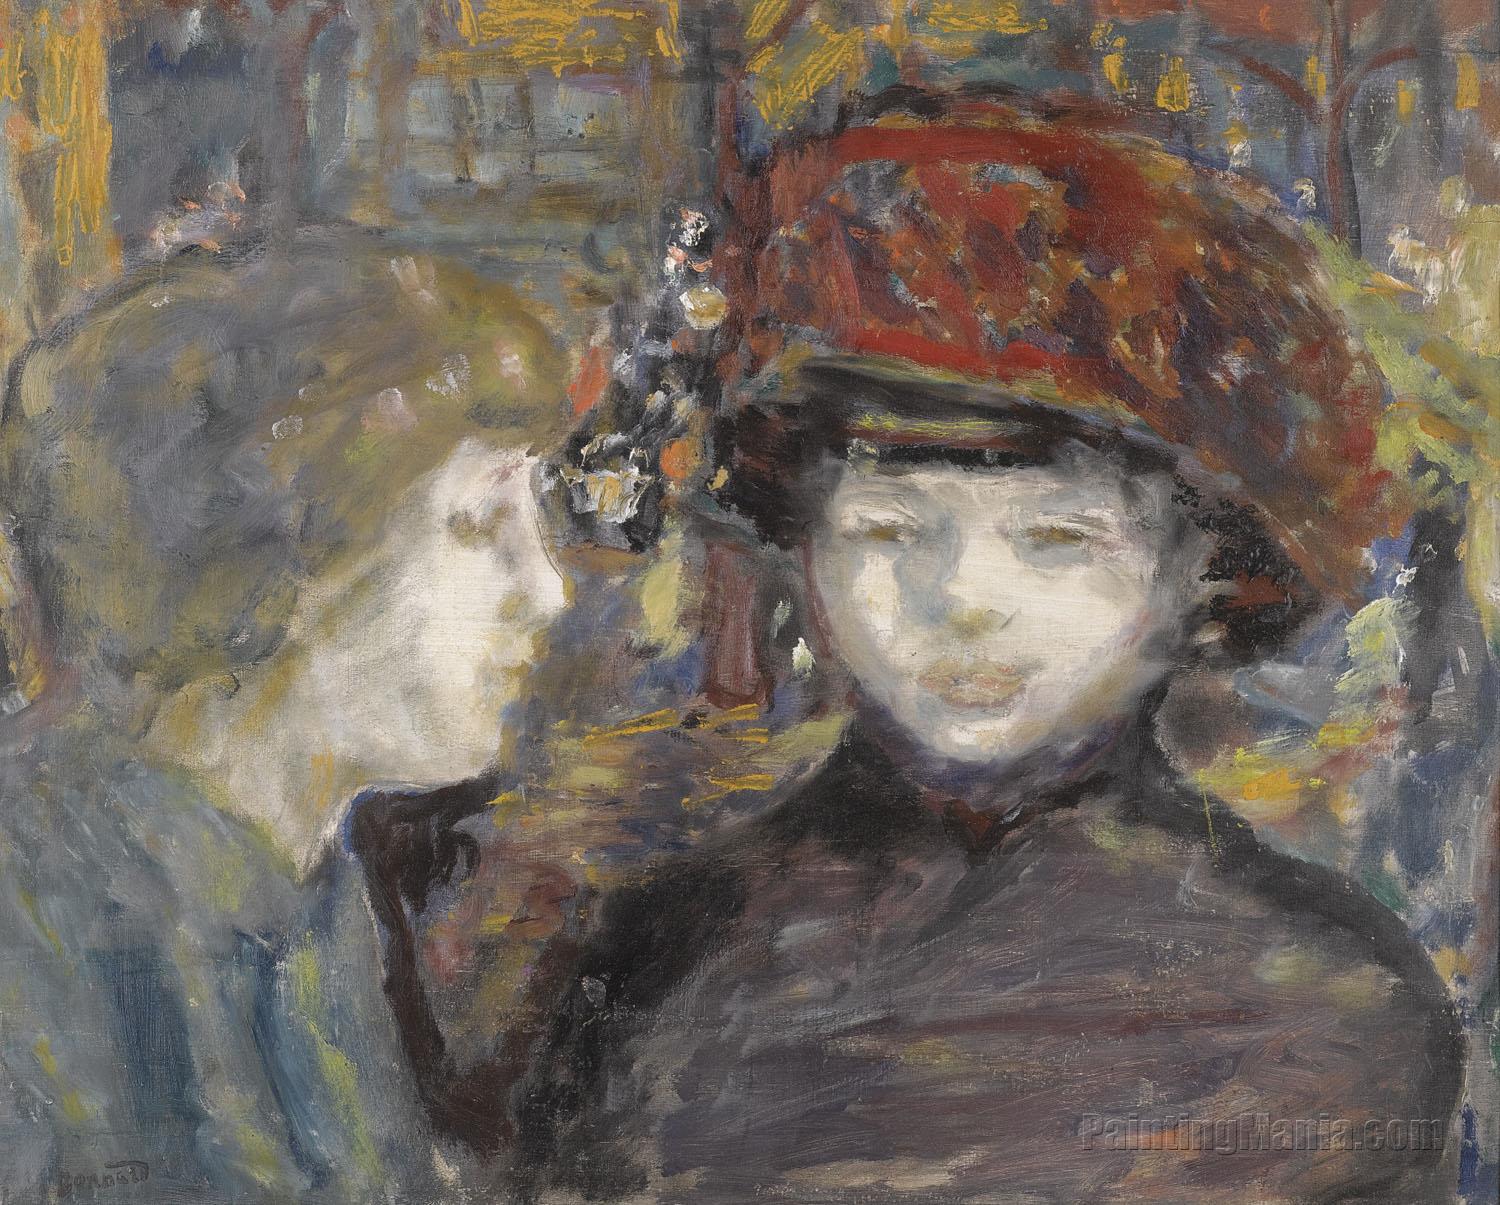 On the Street, Two Figures